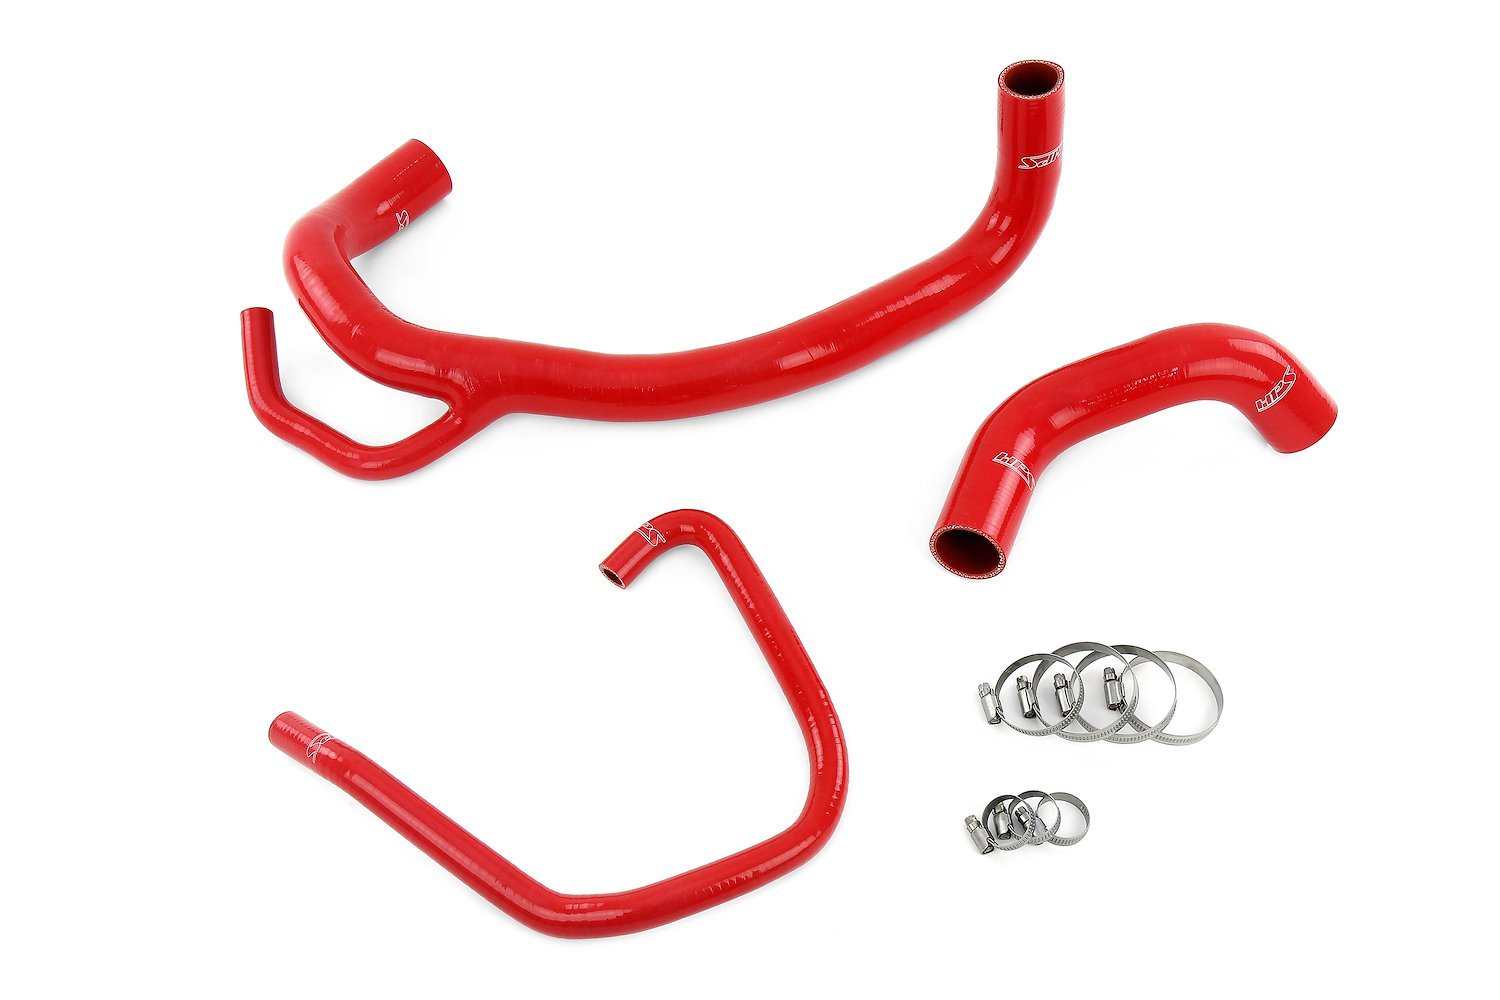 57-1616R-RED Radiator Hose Kit, High-Temp 3-Ply Reinforced Silicone, Replaces OEM Rubber Radiator Hoses